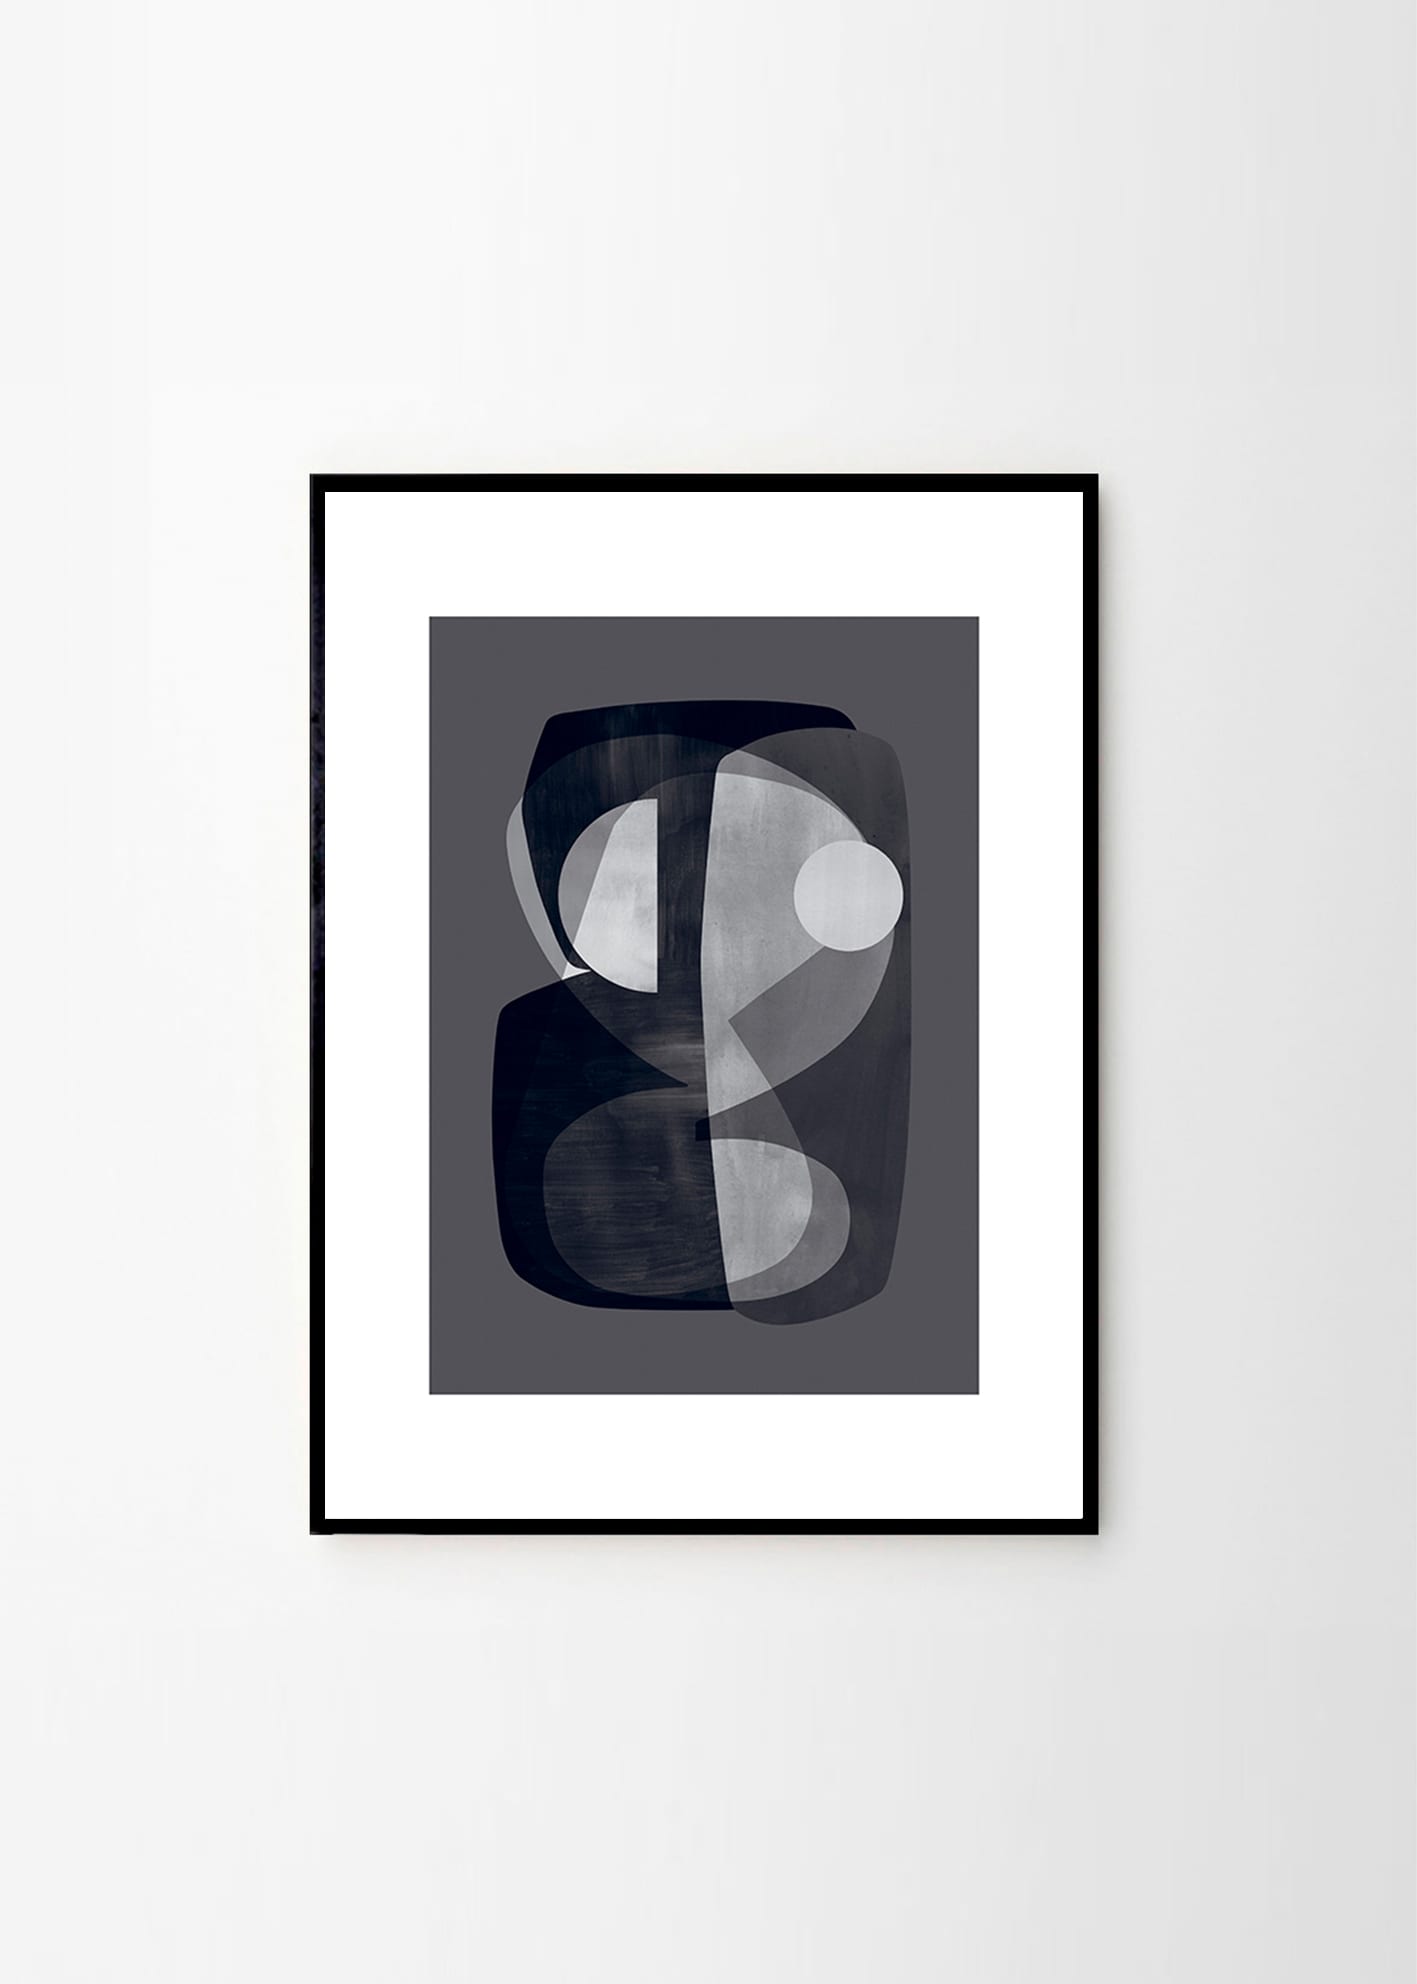 Atelier Cph x THE POSTER CLUB - AbStract Construction